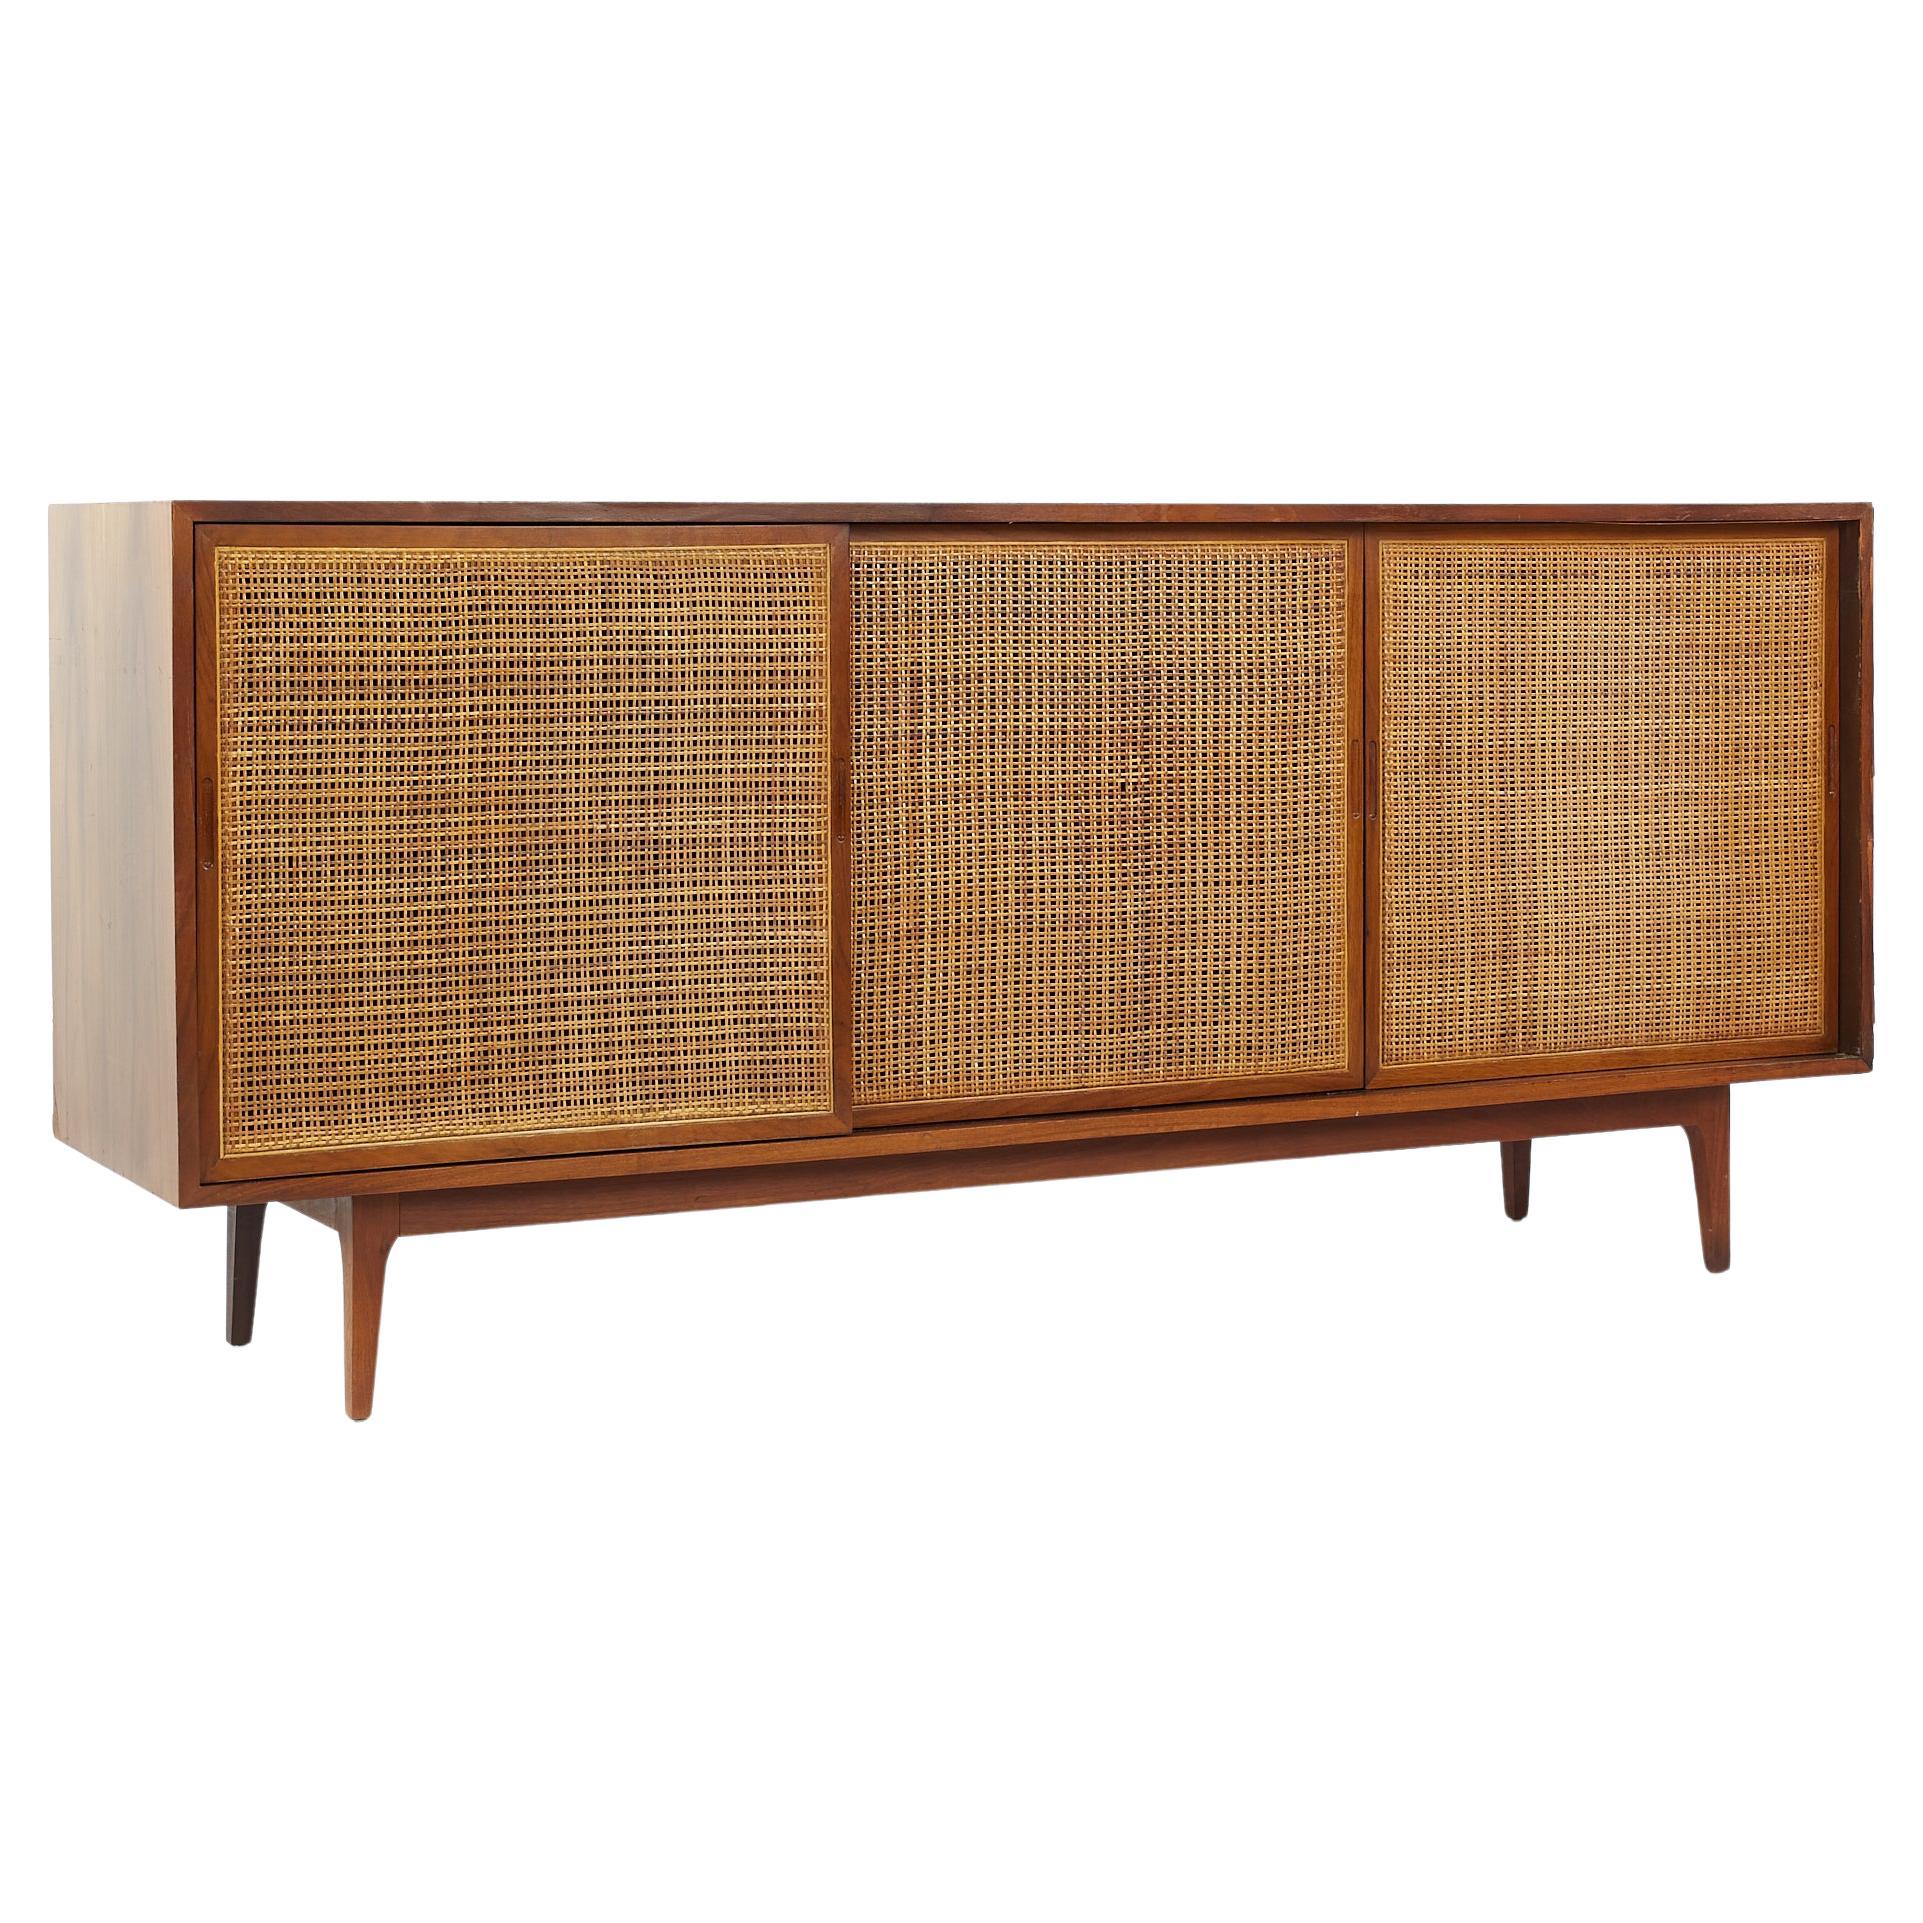 Founders Style Mid Century Walnut and Cane Front Credenza